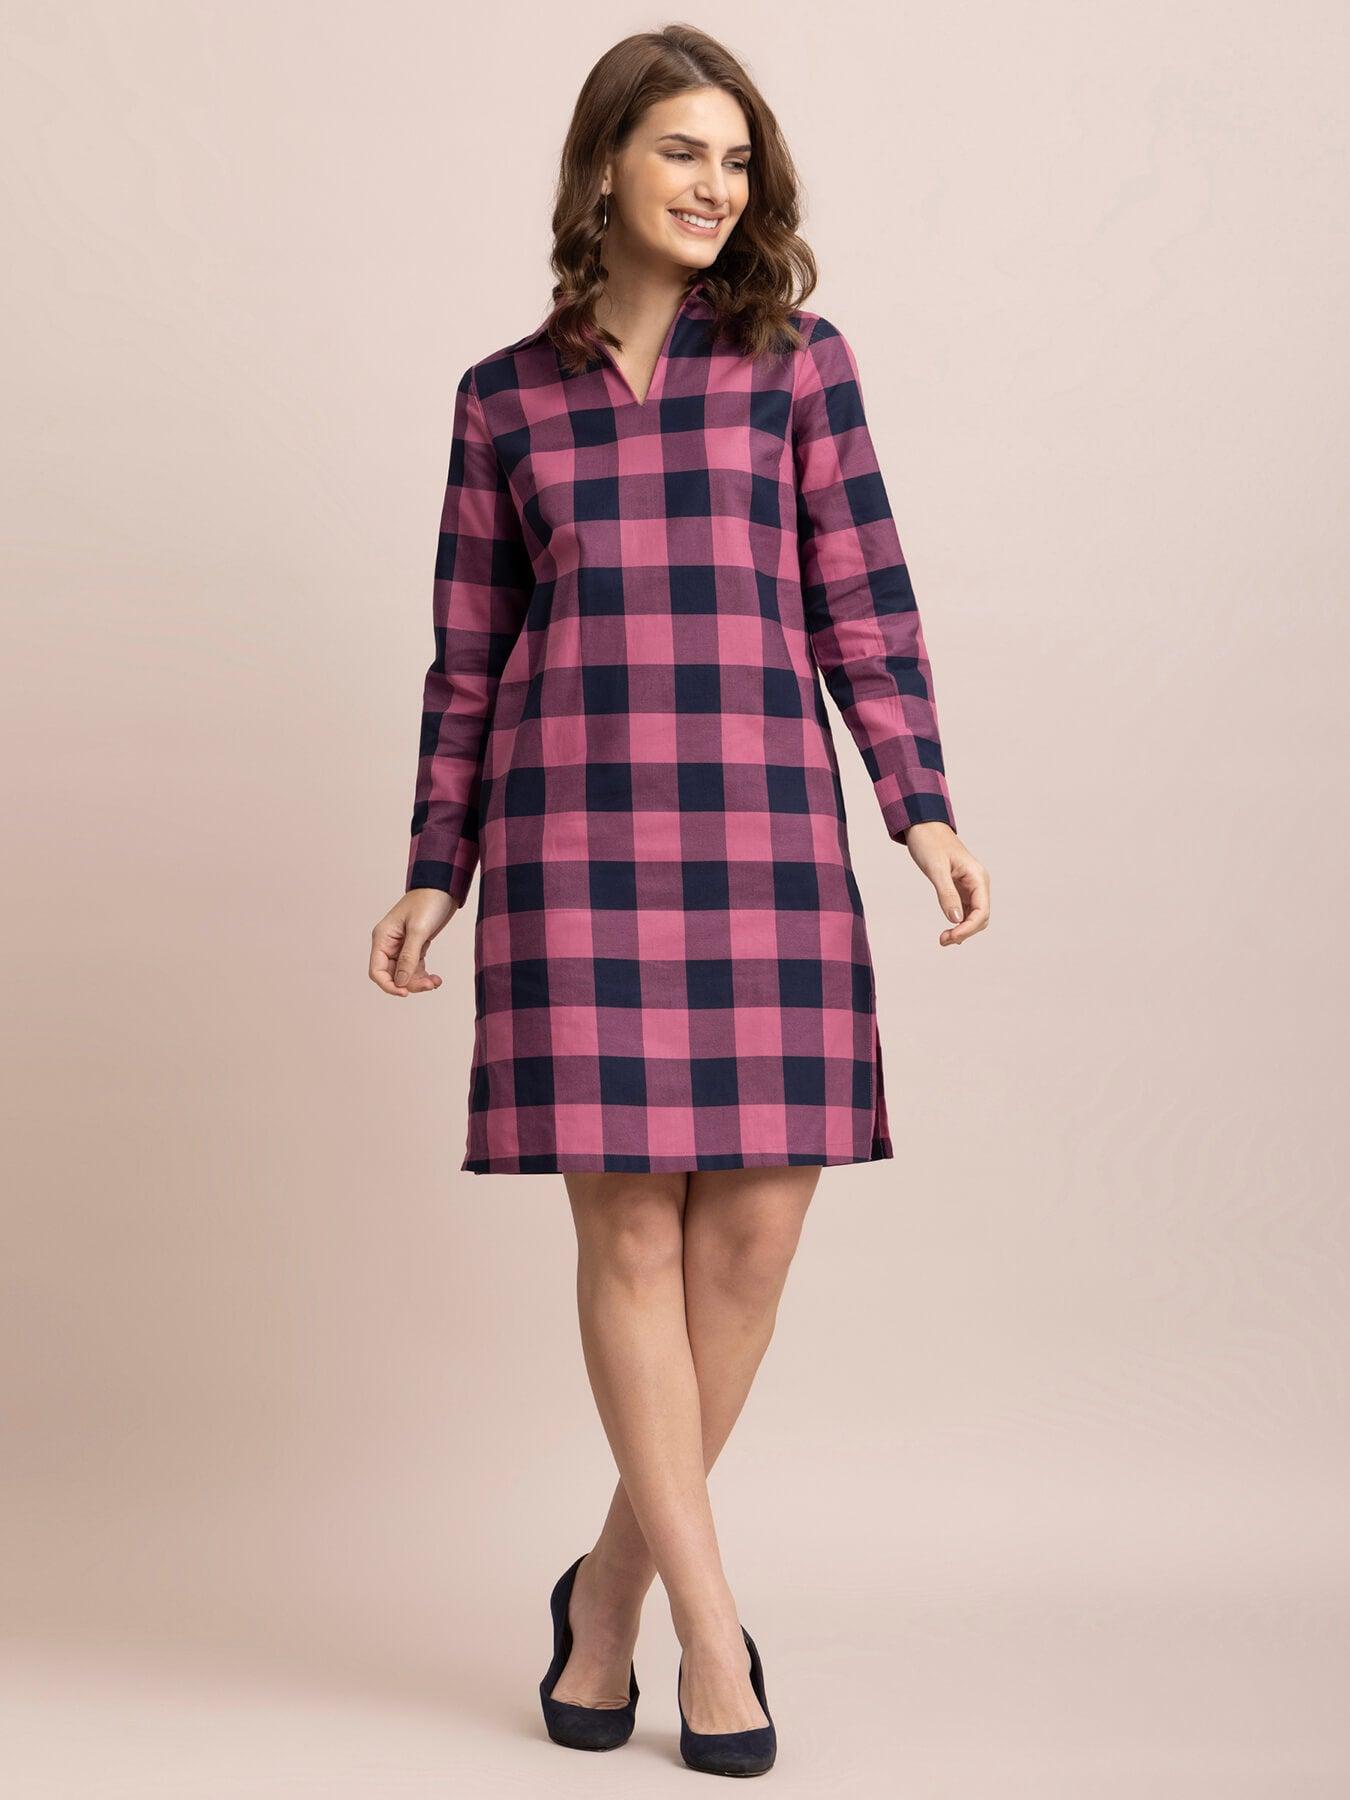 Cotton Checkered Shift Dress - Pink and Navy| Formal Dresses